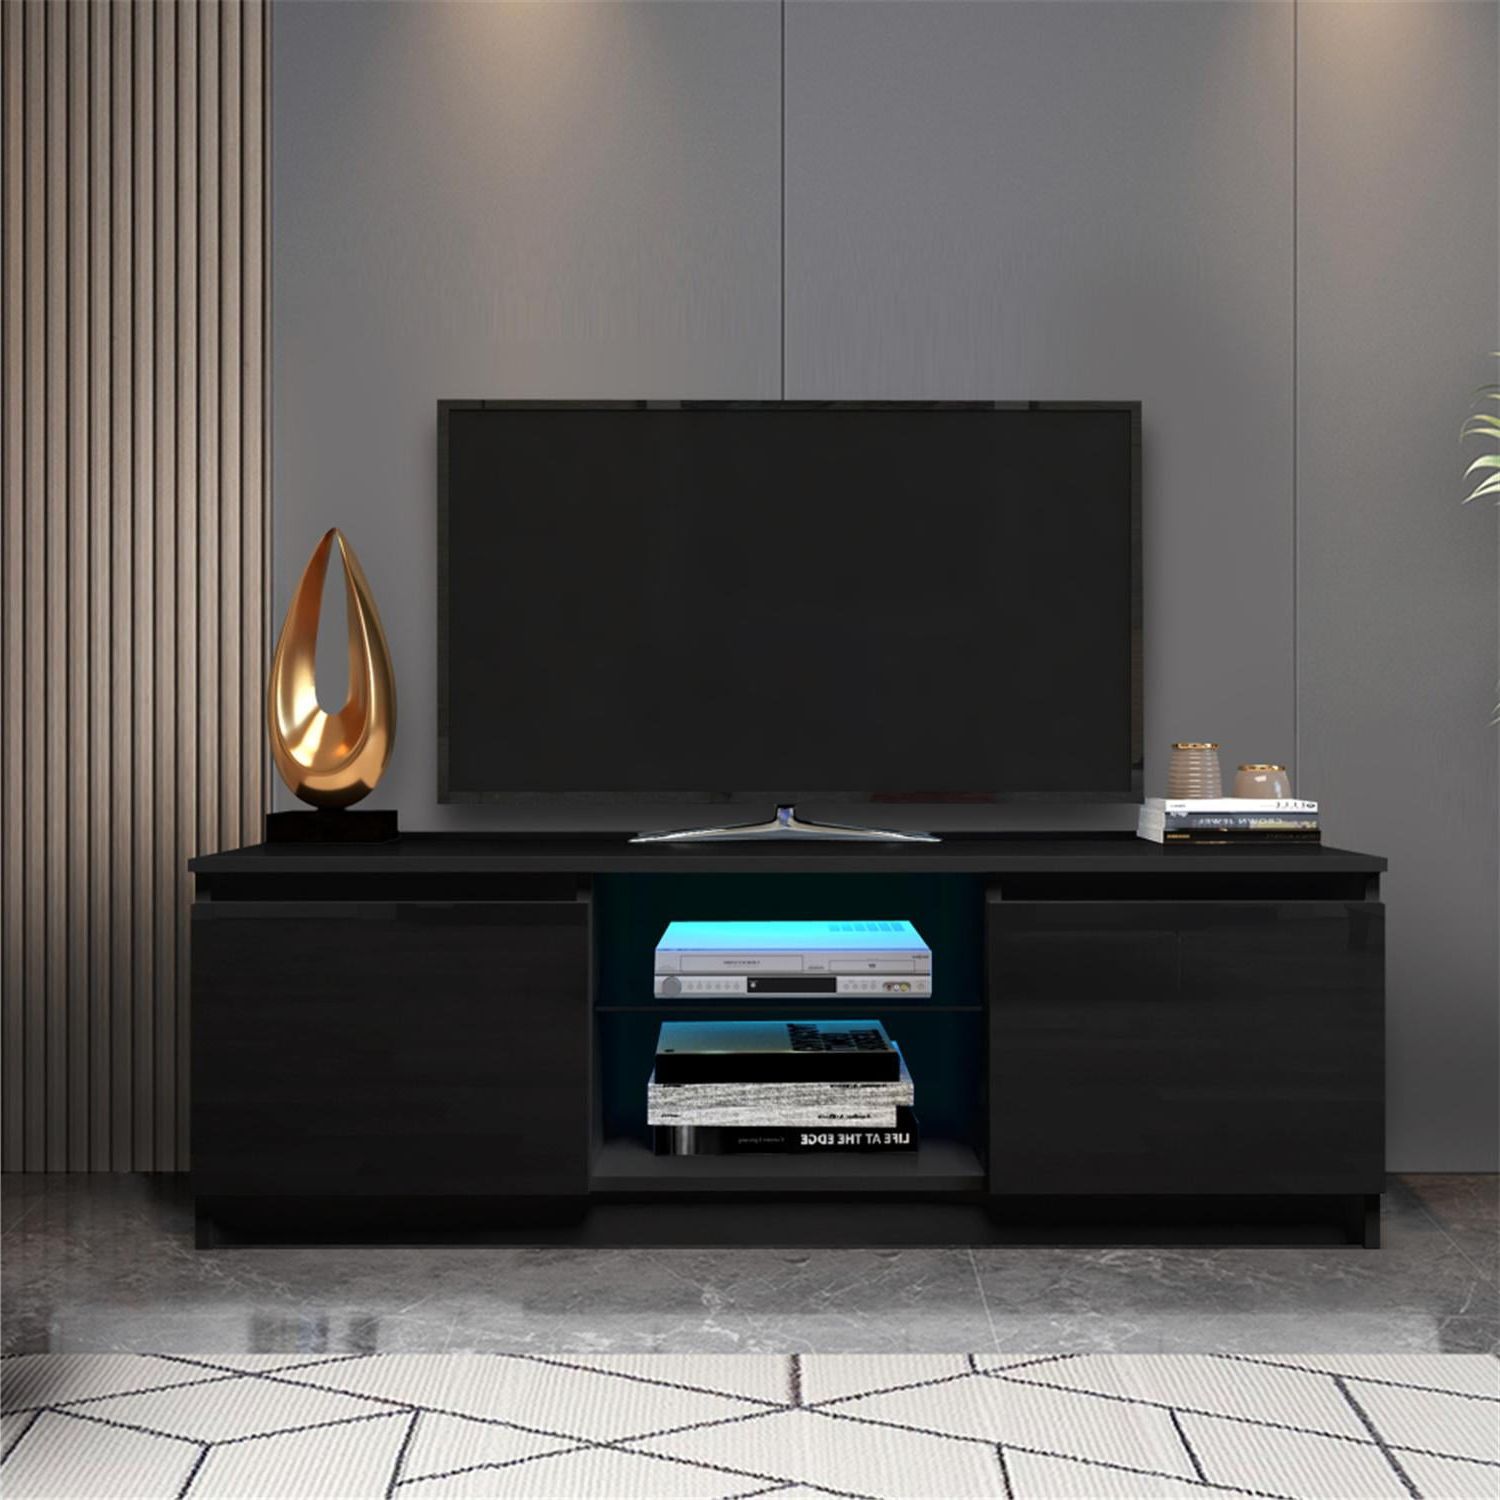 Preferred Tv Stand With Led Lights, Modern Led Tv Cabinet With Storage Drawers Pertaining To Led Tv Stands With Outlet (View 11 of 15)